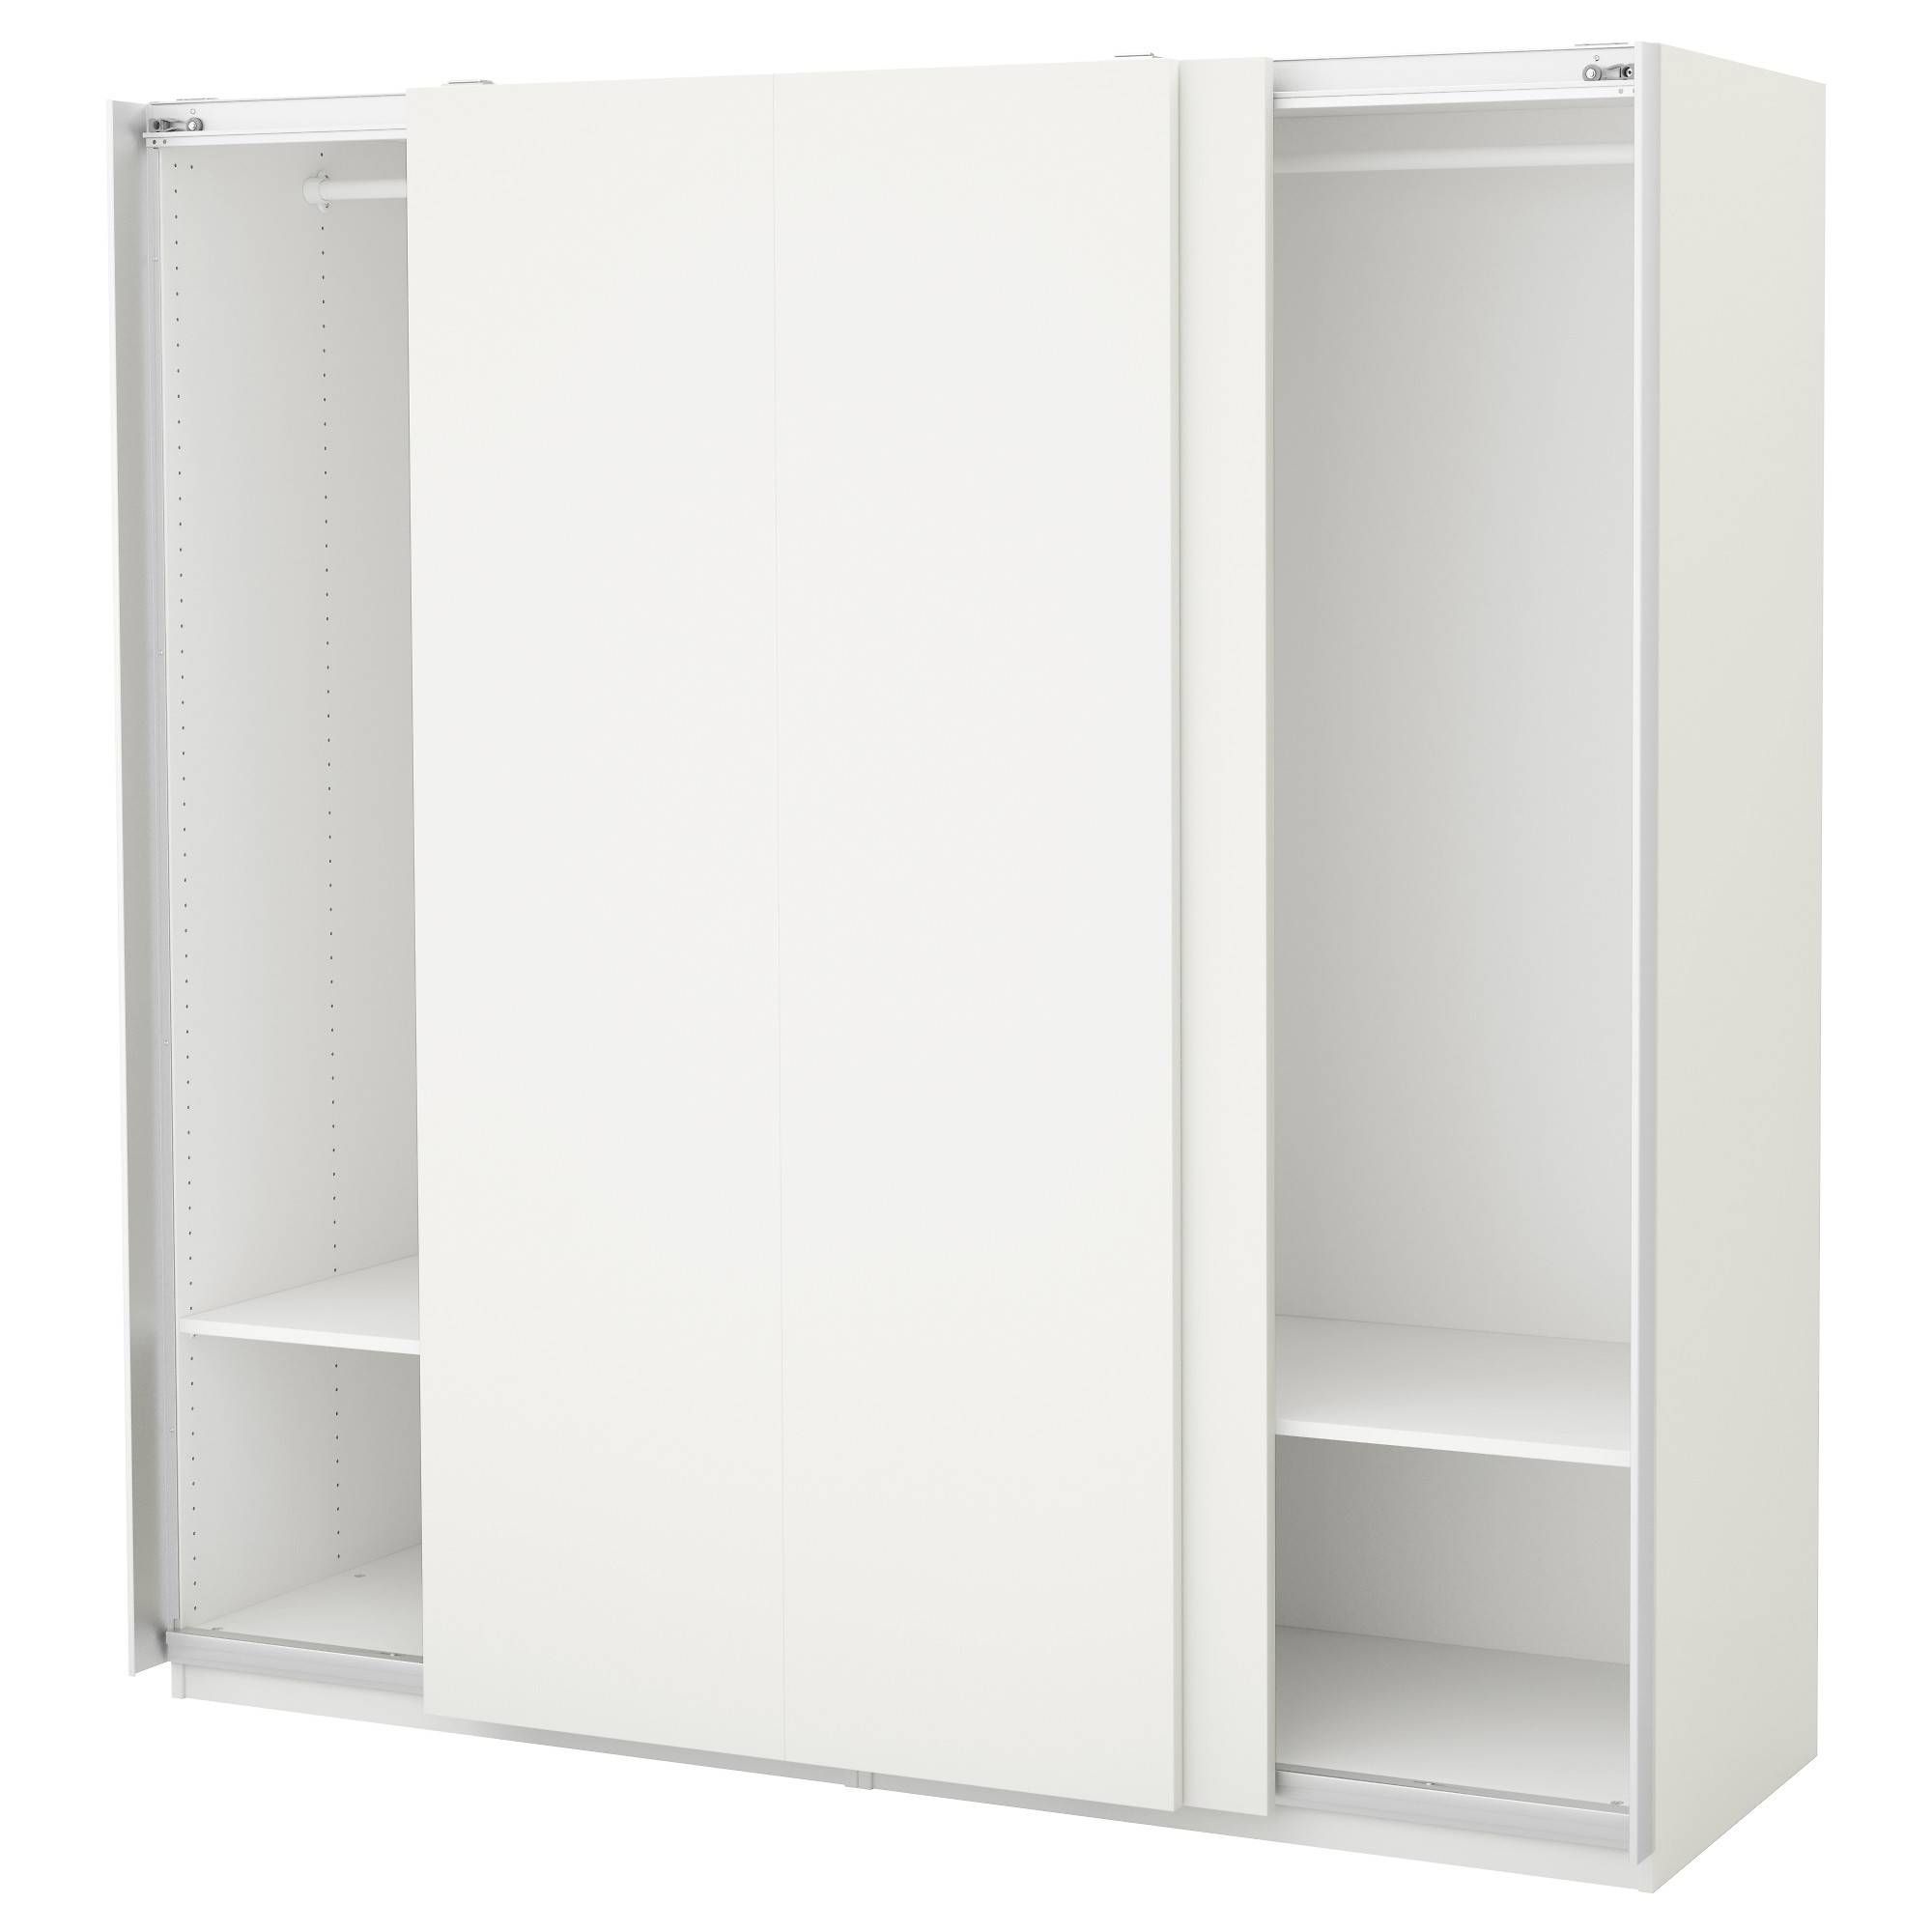 Wardrobes | Ikea For White Cheap Wardrobes (View 6 of 15)